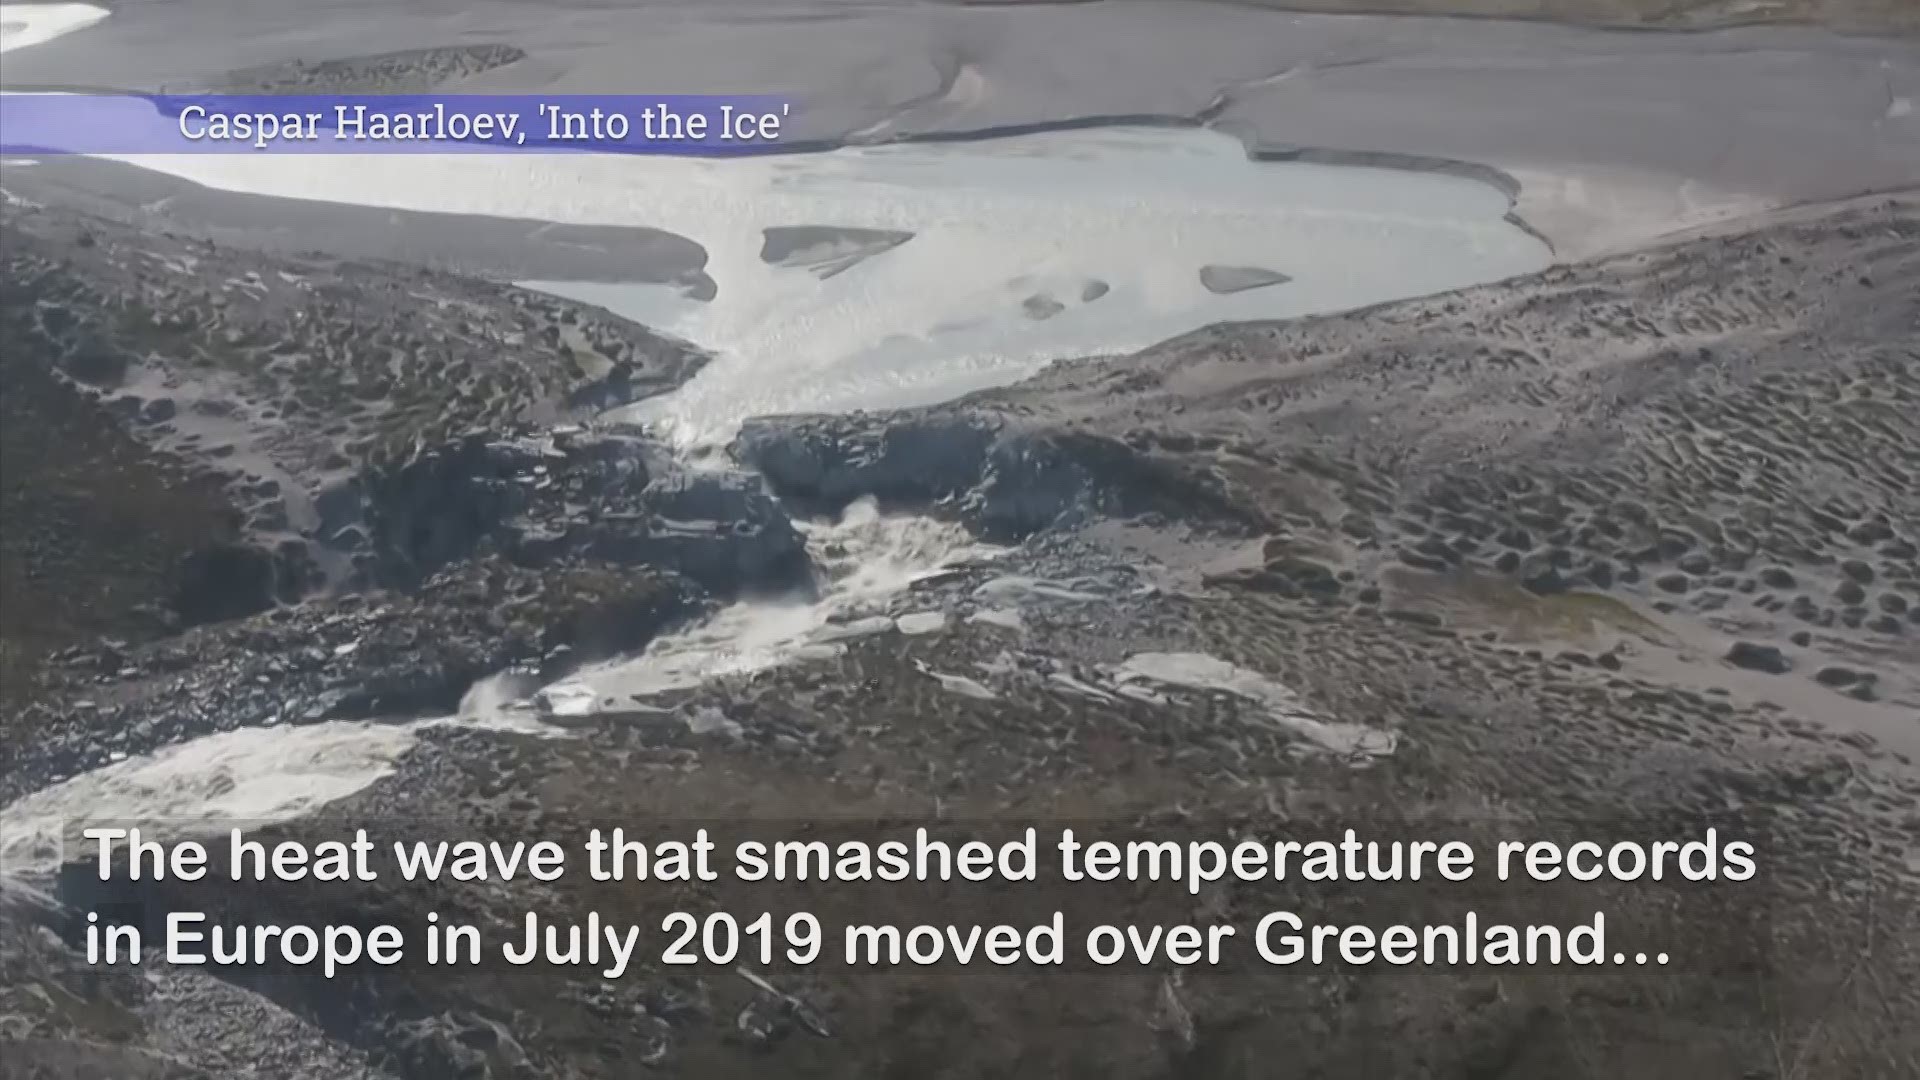 The heatwave that smashed high temperature records in Europe in July 2019 moved over Greenland, accelerating the melting of its ice sheet. (AP)